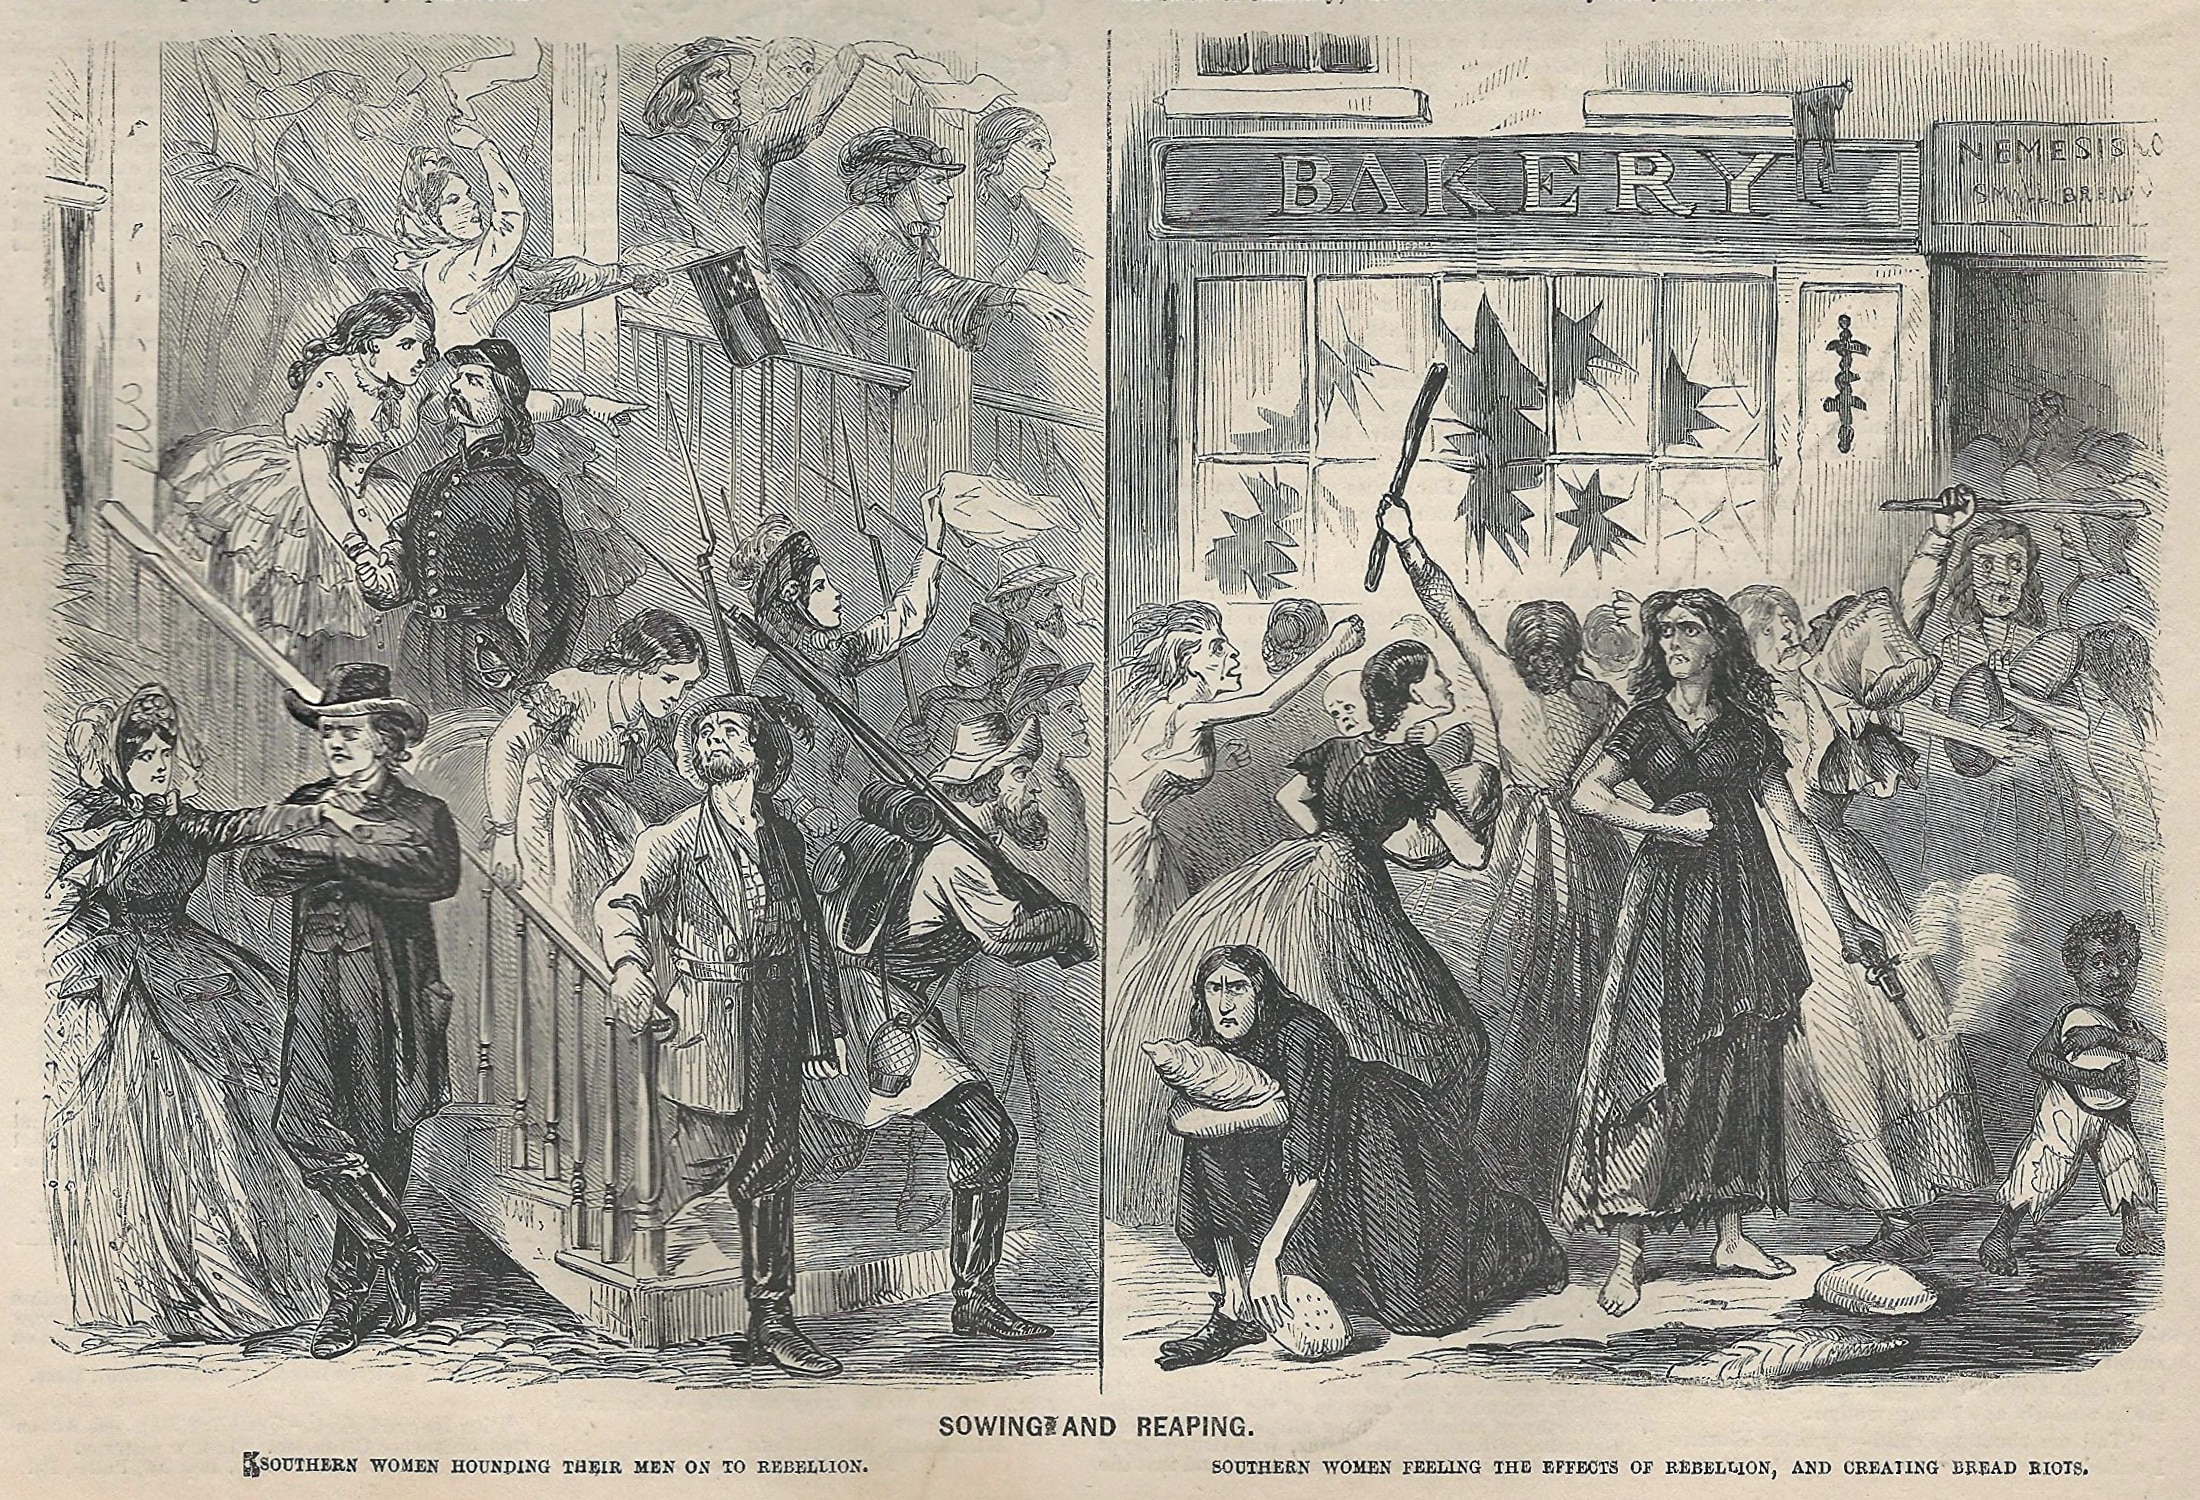 "Sowing and reaping, Southern women hounding their men on to rebellion, Southern women feeling the effects of rebellion, and creating bread riots," Frank Leslie’s Illustrated Newspaper, May 23, 1863, pp. 141, wood engraving on paper (Library of Congress)